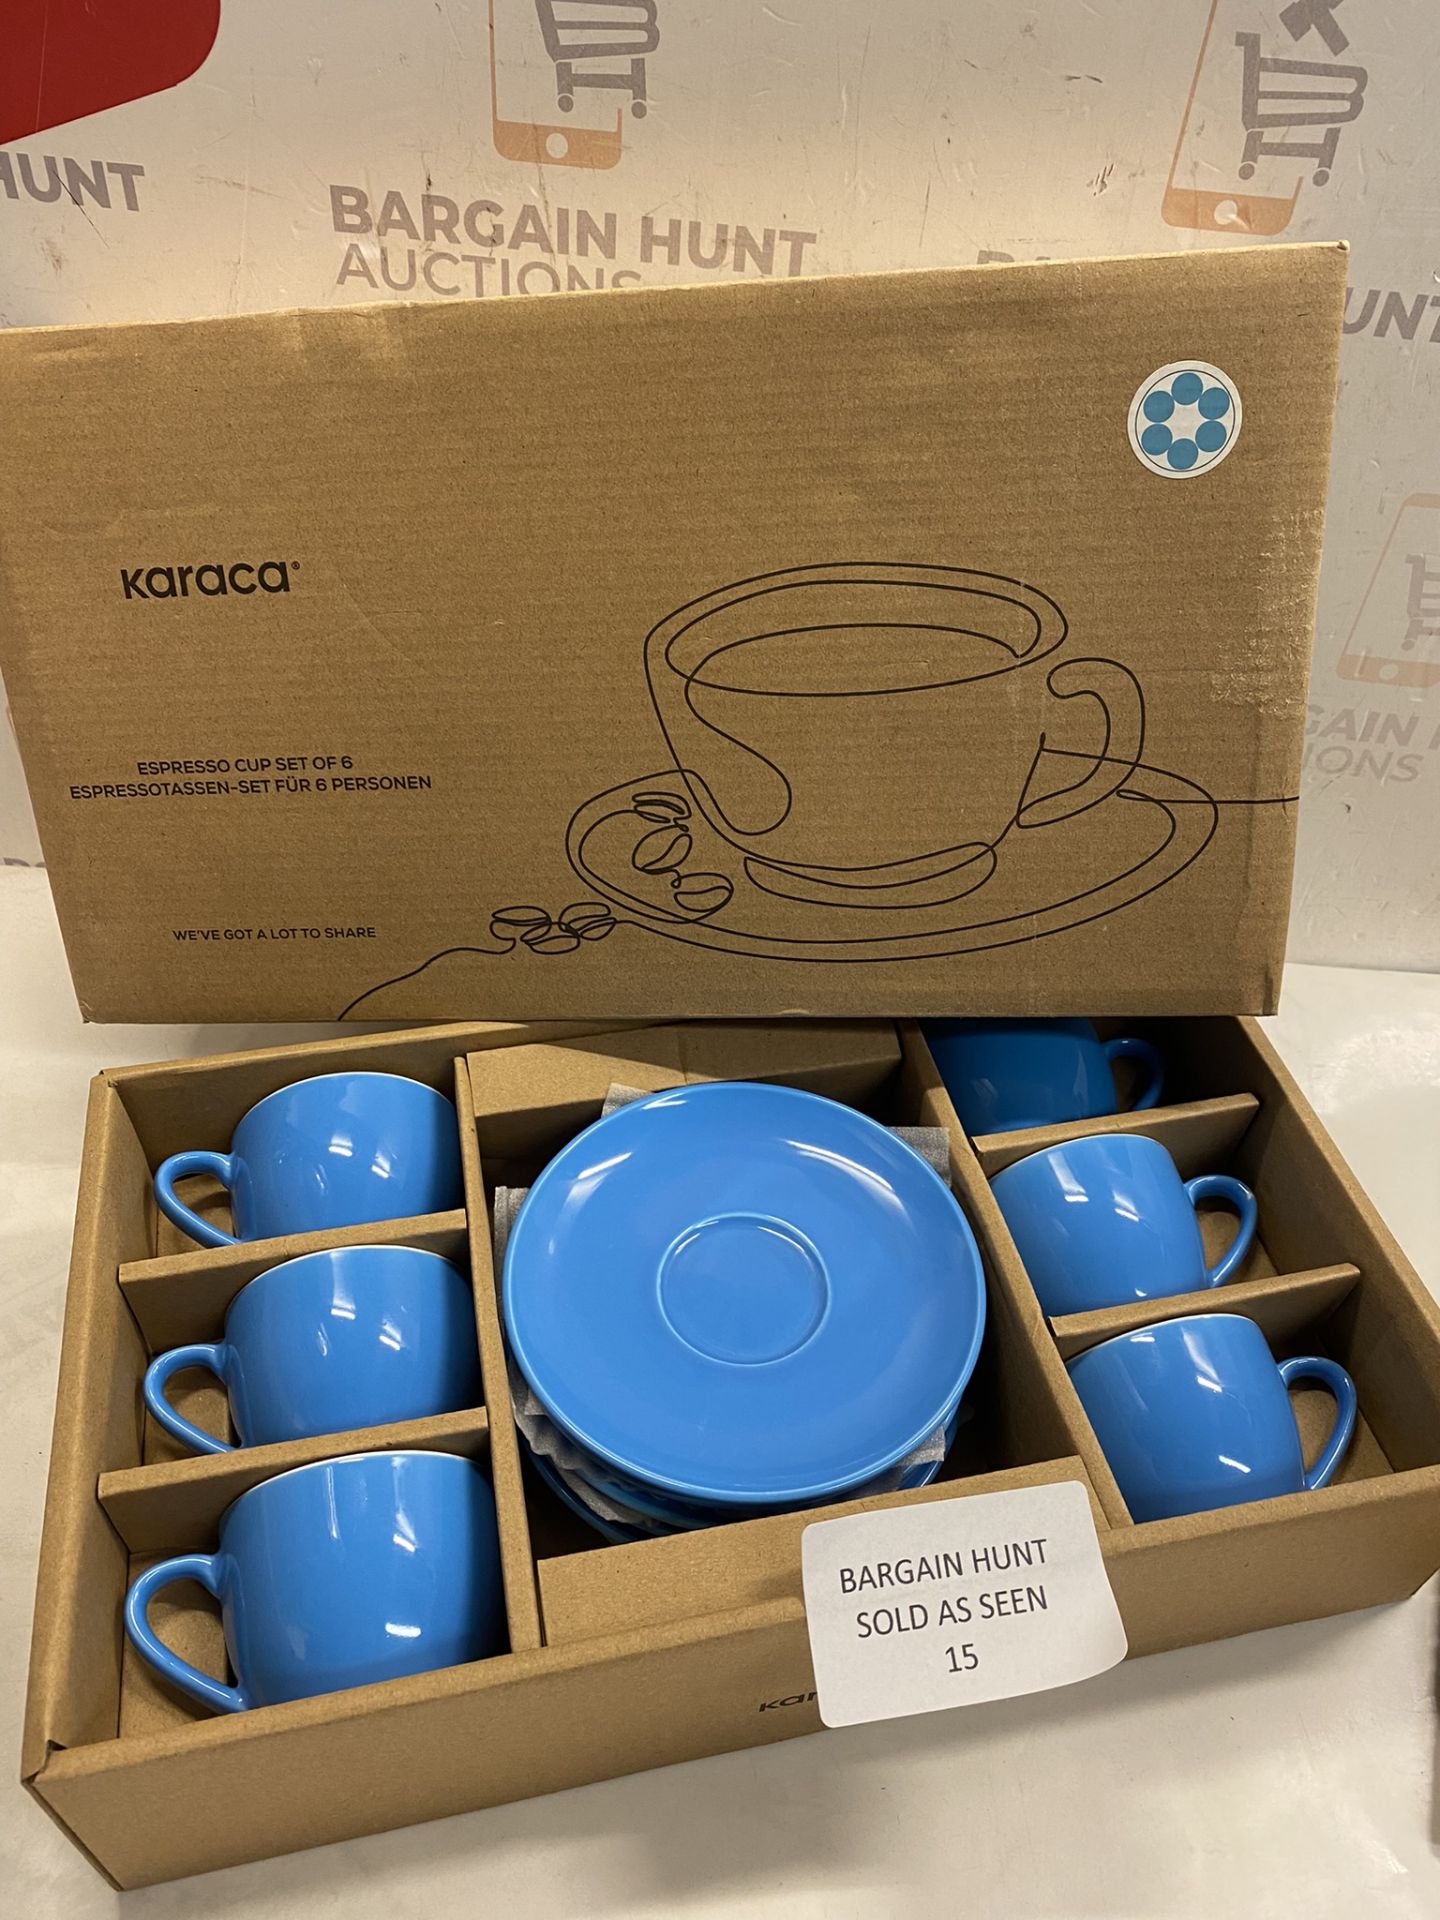 KARACA Sky Espresso Cups for 6 People, 80 ml, Sky, 6 x Espresso Cups and 6 x Saucers, Robust Mocha - Image 2 of 3